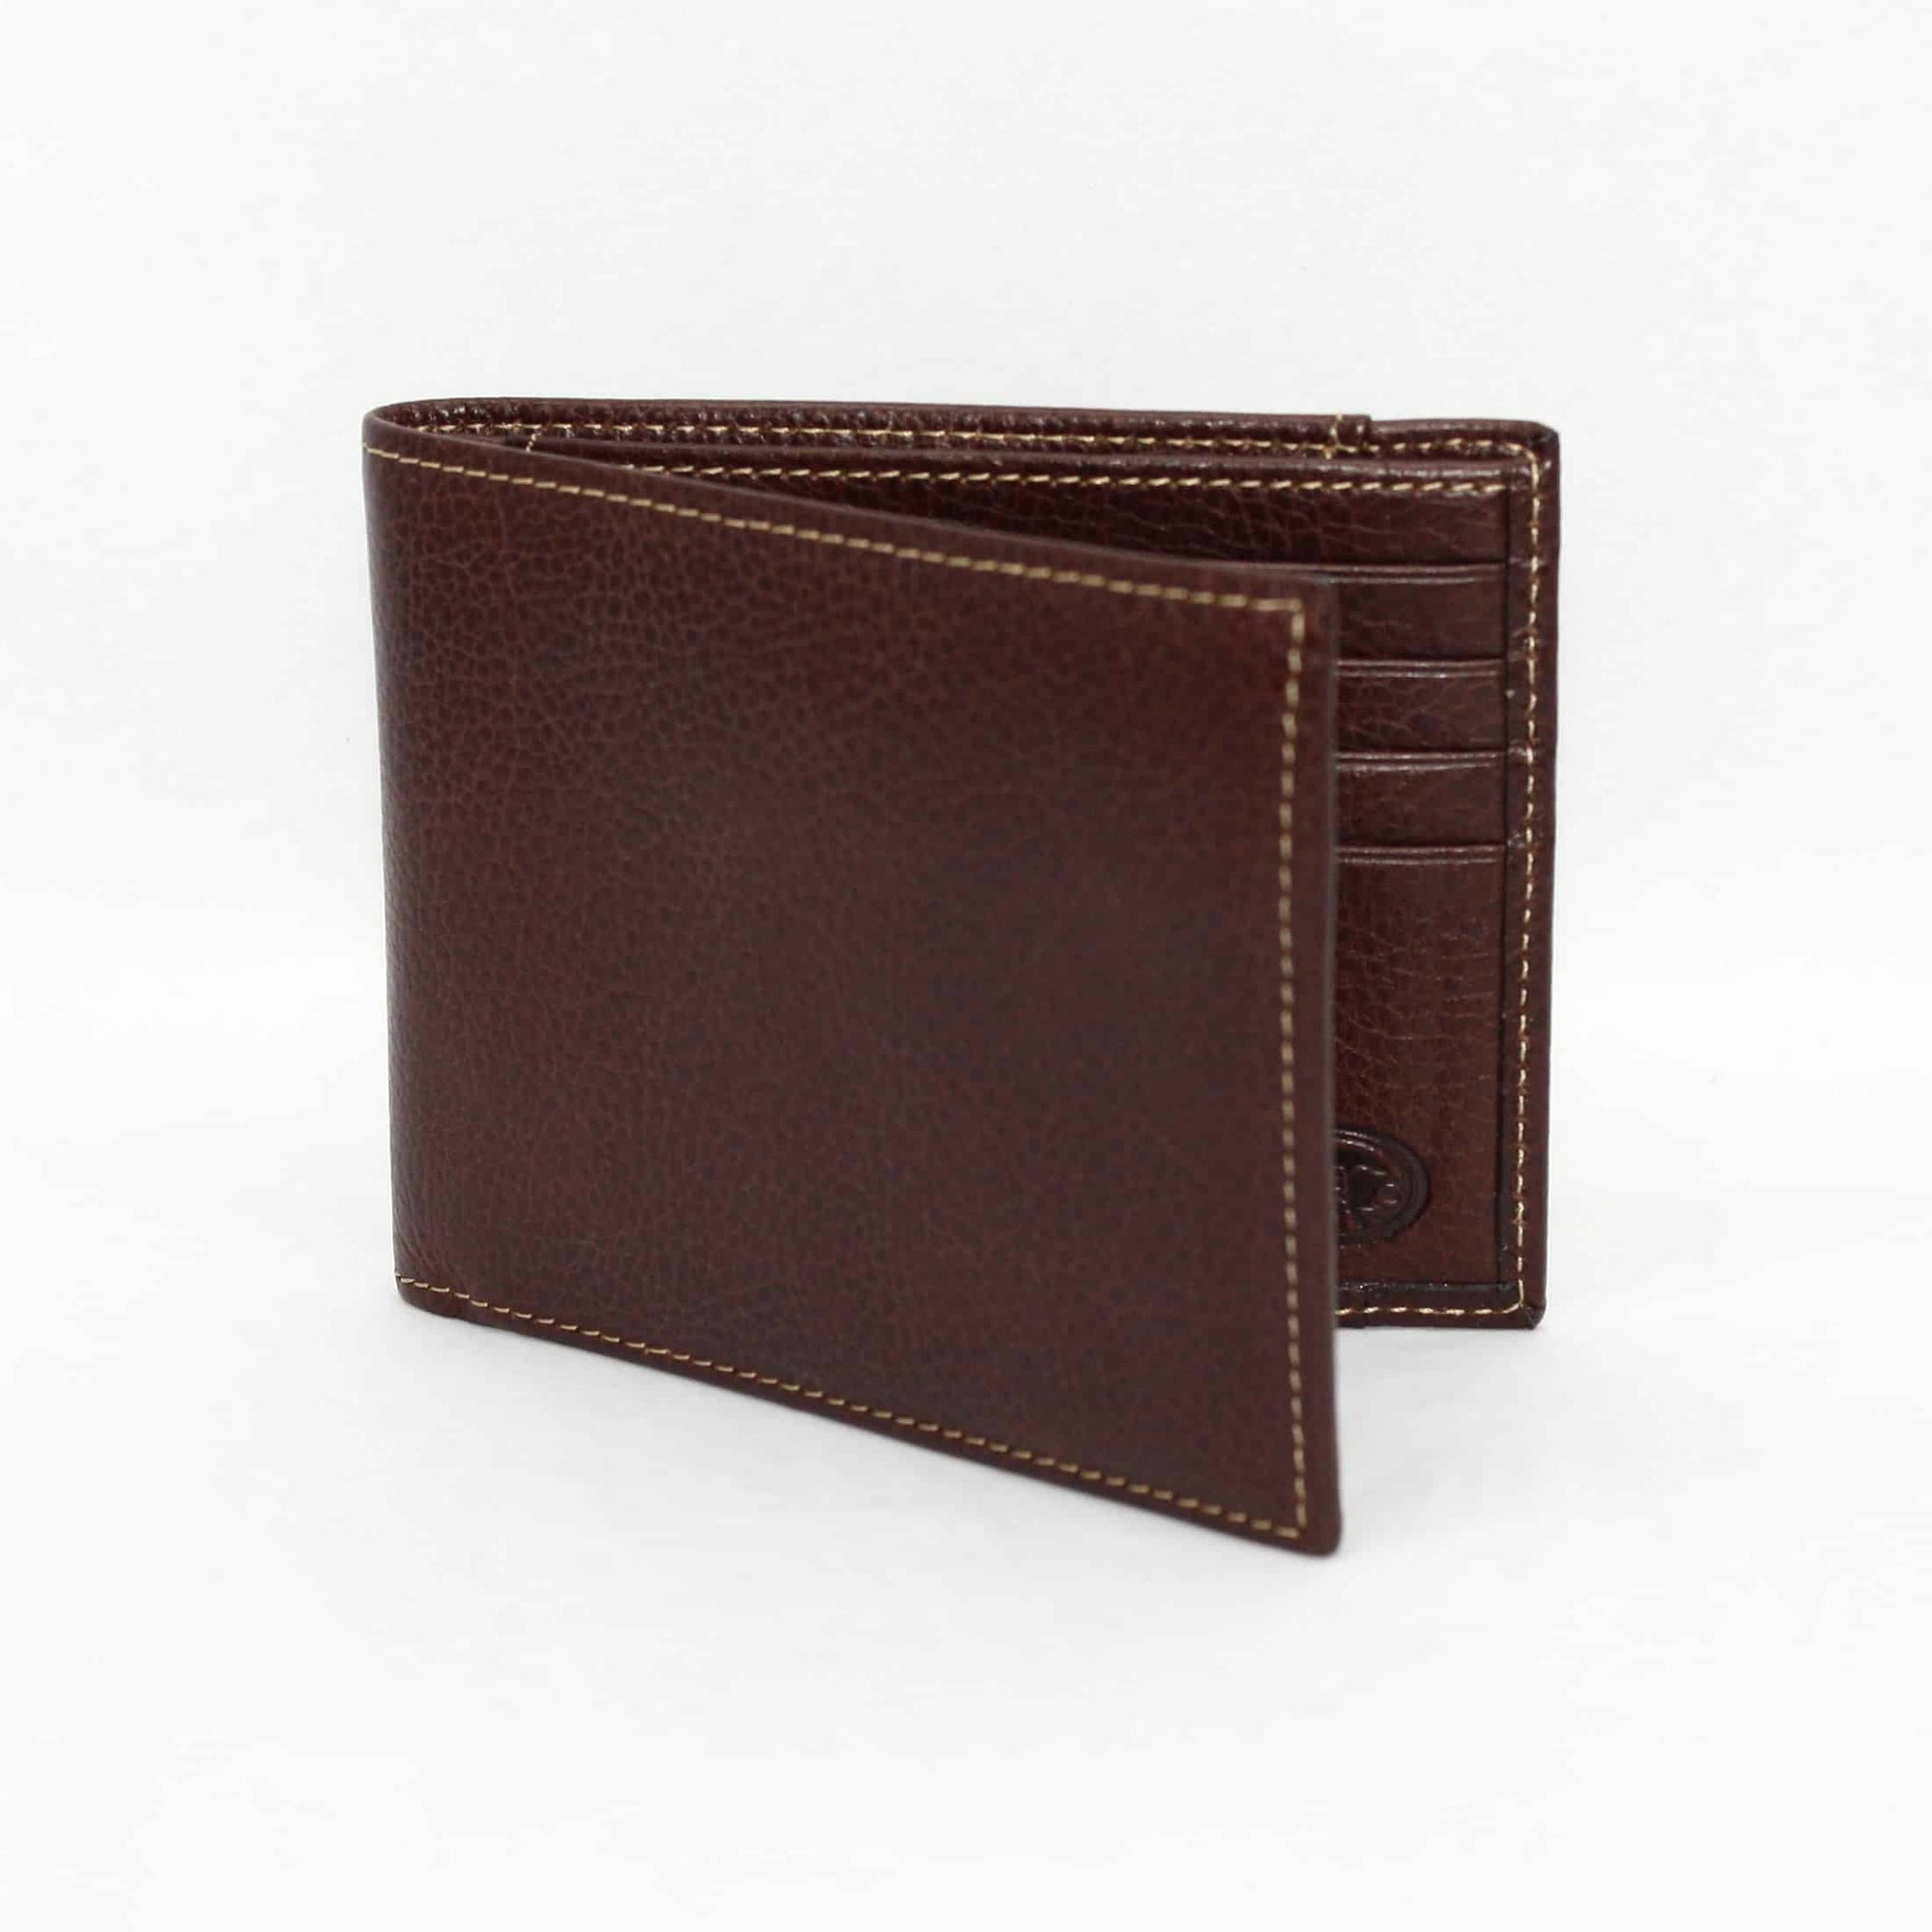 Tumbled Glove Leather Billfold Wallet in Brown by Torino Leather